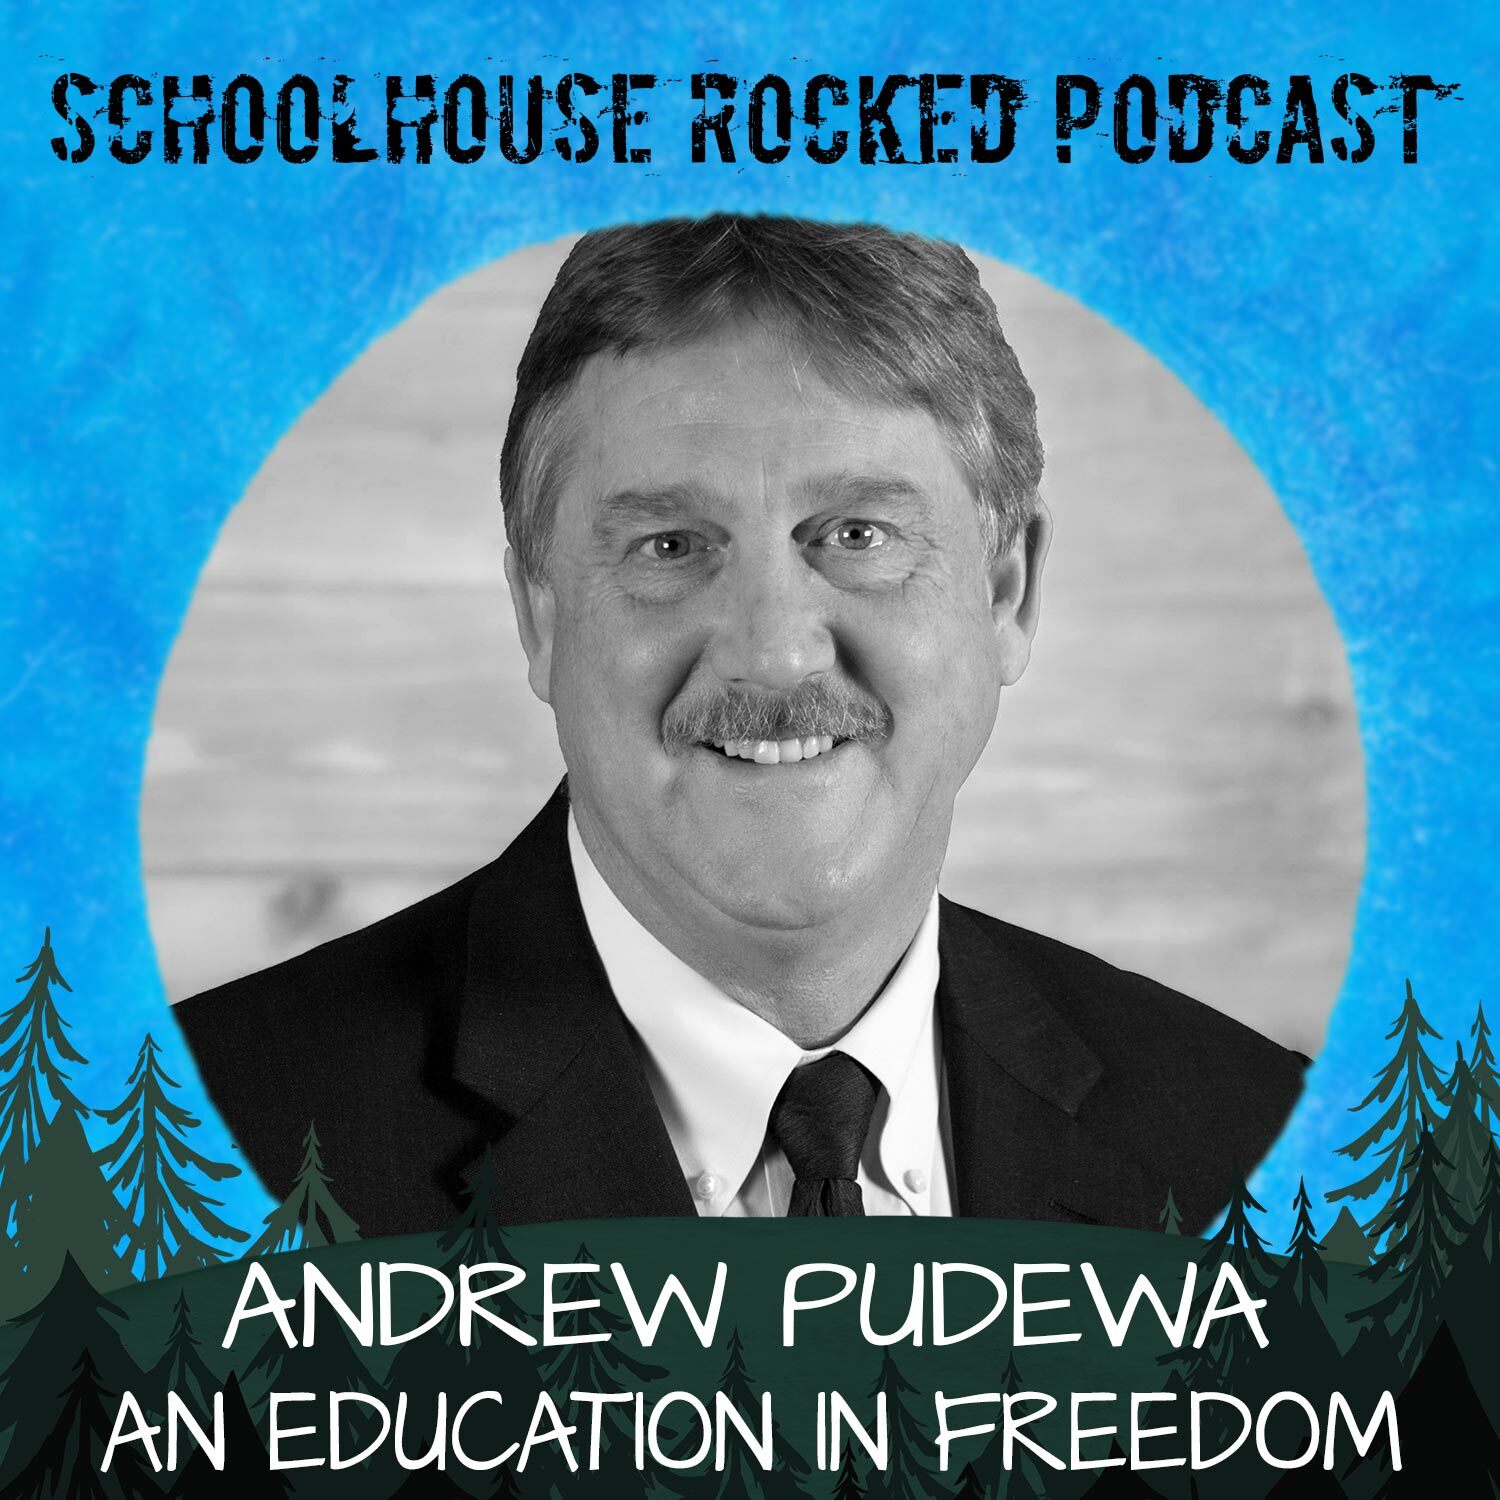 An Education in Freedom - Andrew Pudewa